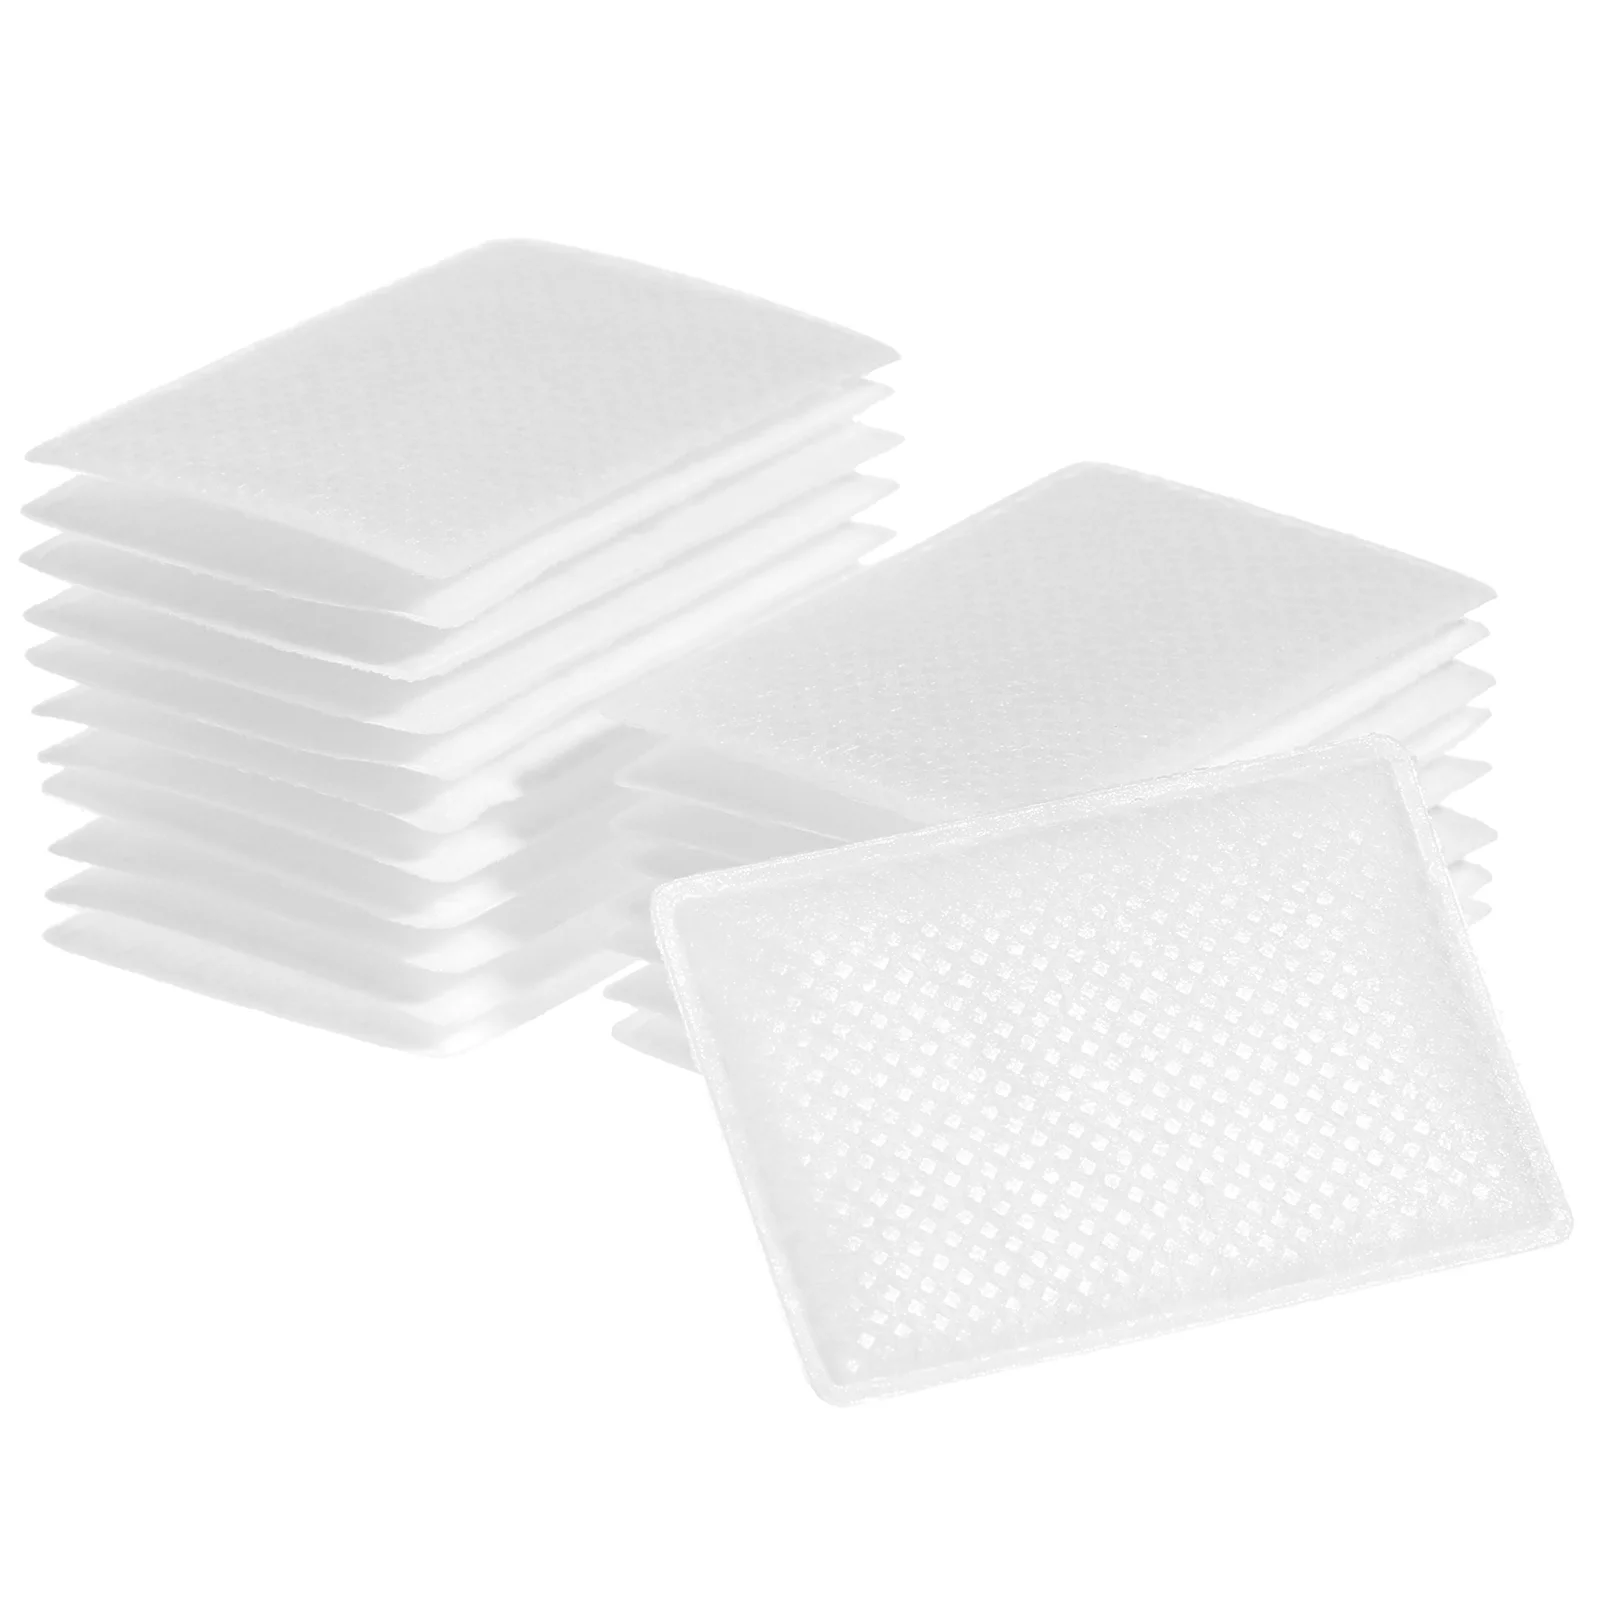 20 Pcs White Out Cotton Motor Pads Ventilator Accessories Filter Sponge Glives Cushions ventilator long tubing universal accessories pulmonary disease use with ventilator hysteria respiratory system 1 pcs